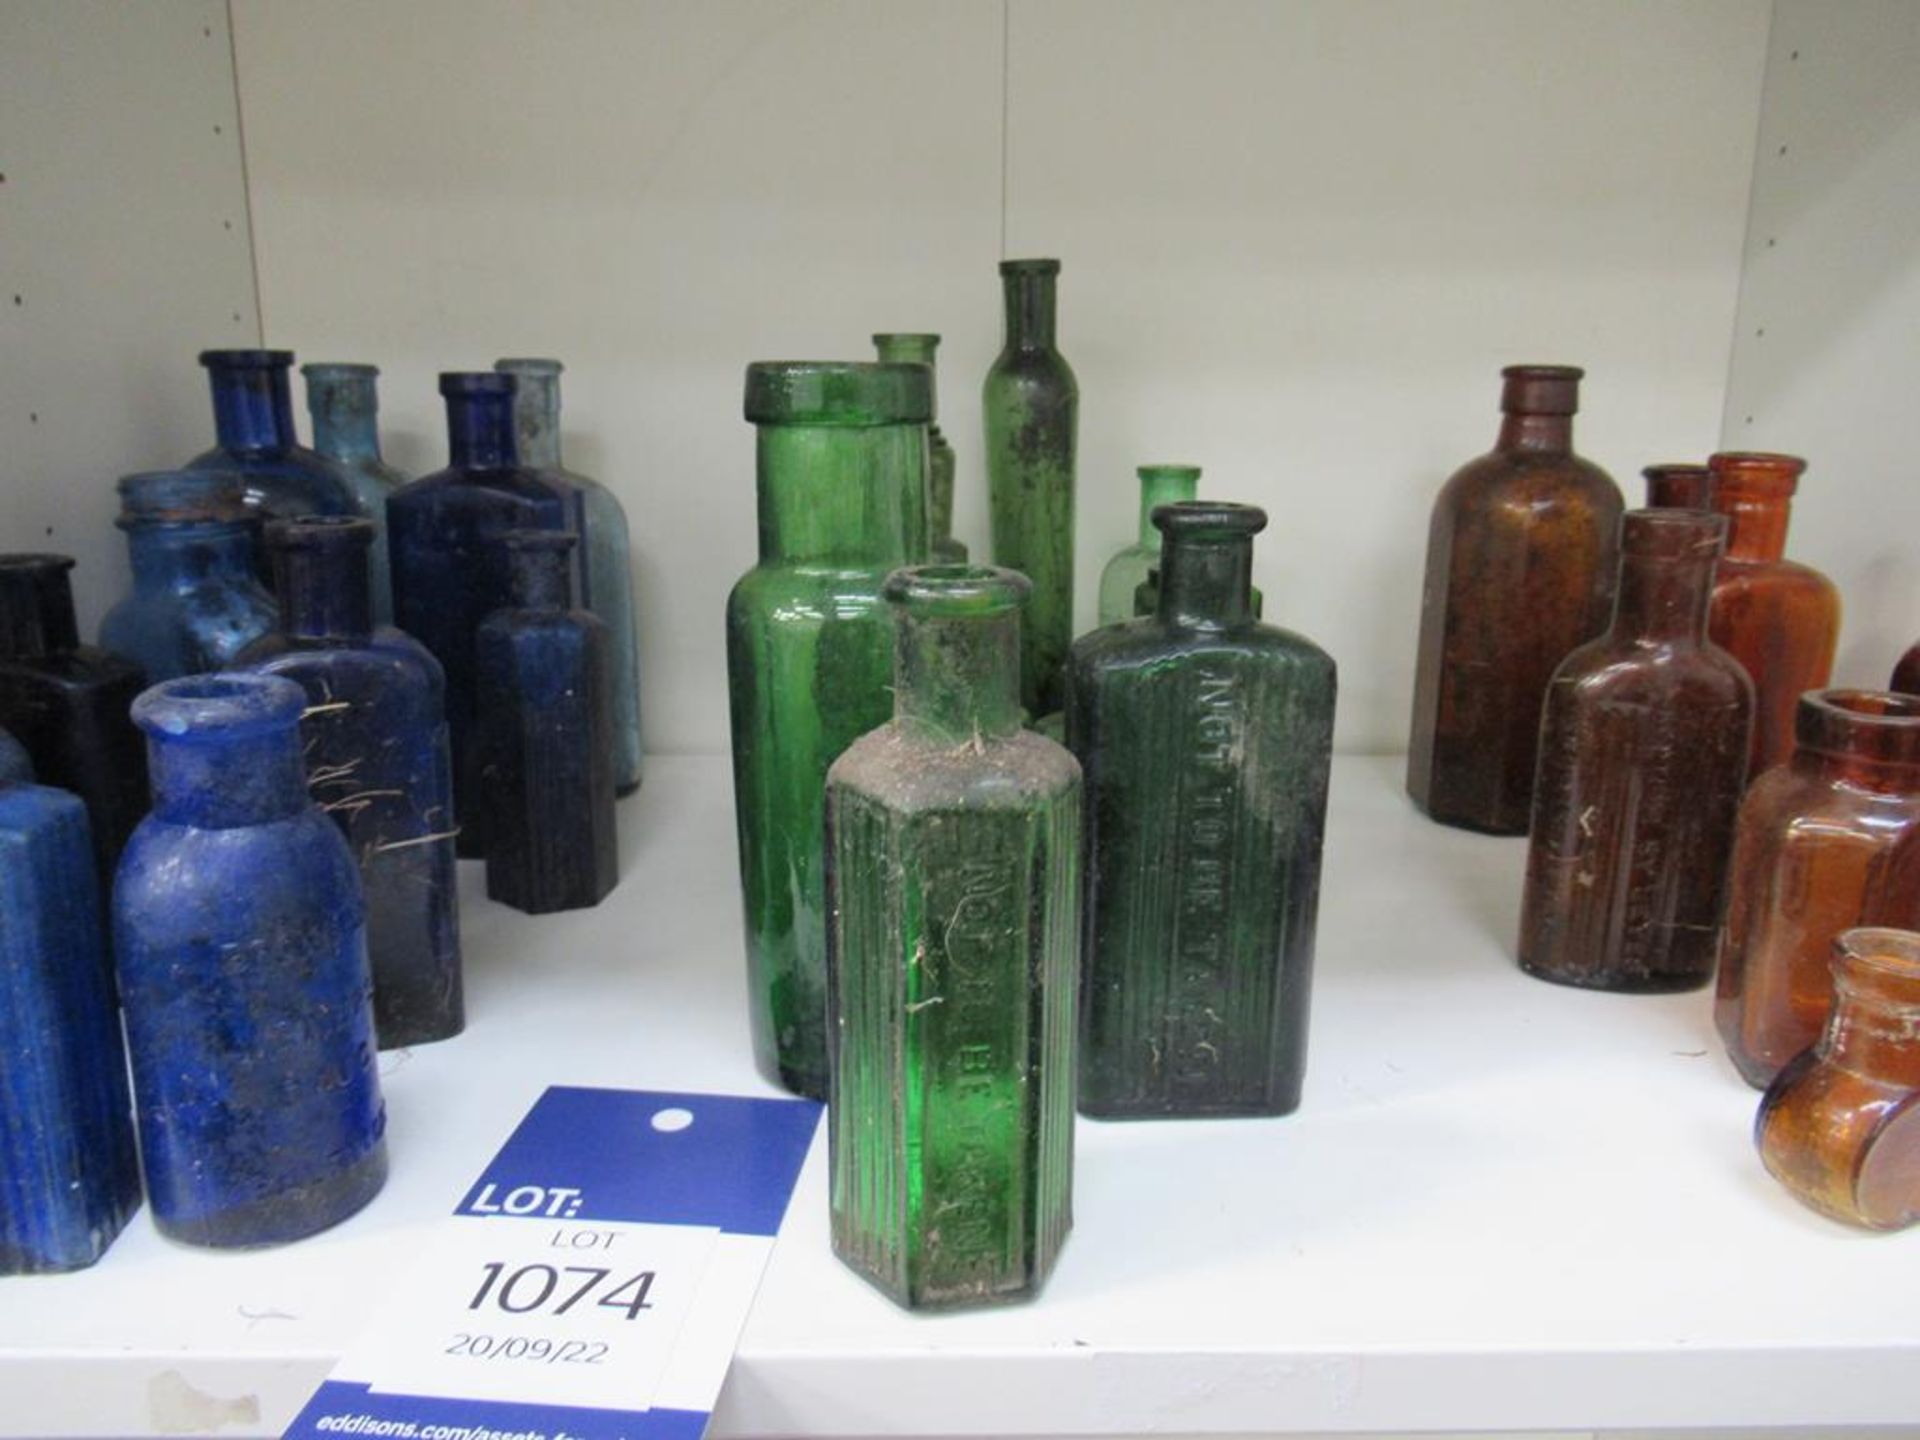 Shelf of Assorted Cobalt Green and Amber Bottles - many saying 'not to be taken' - Image 3 of 4